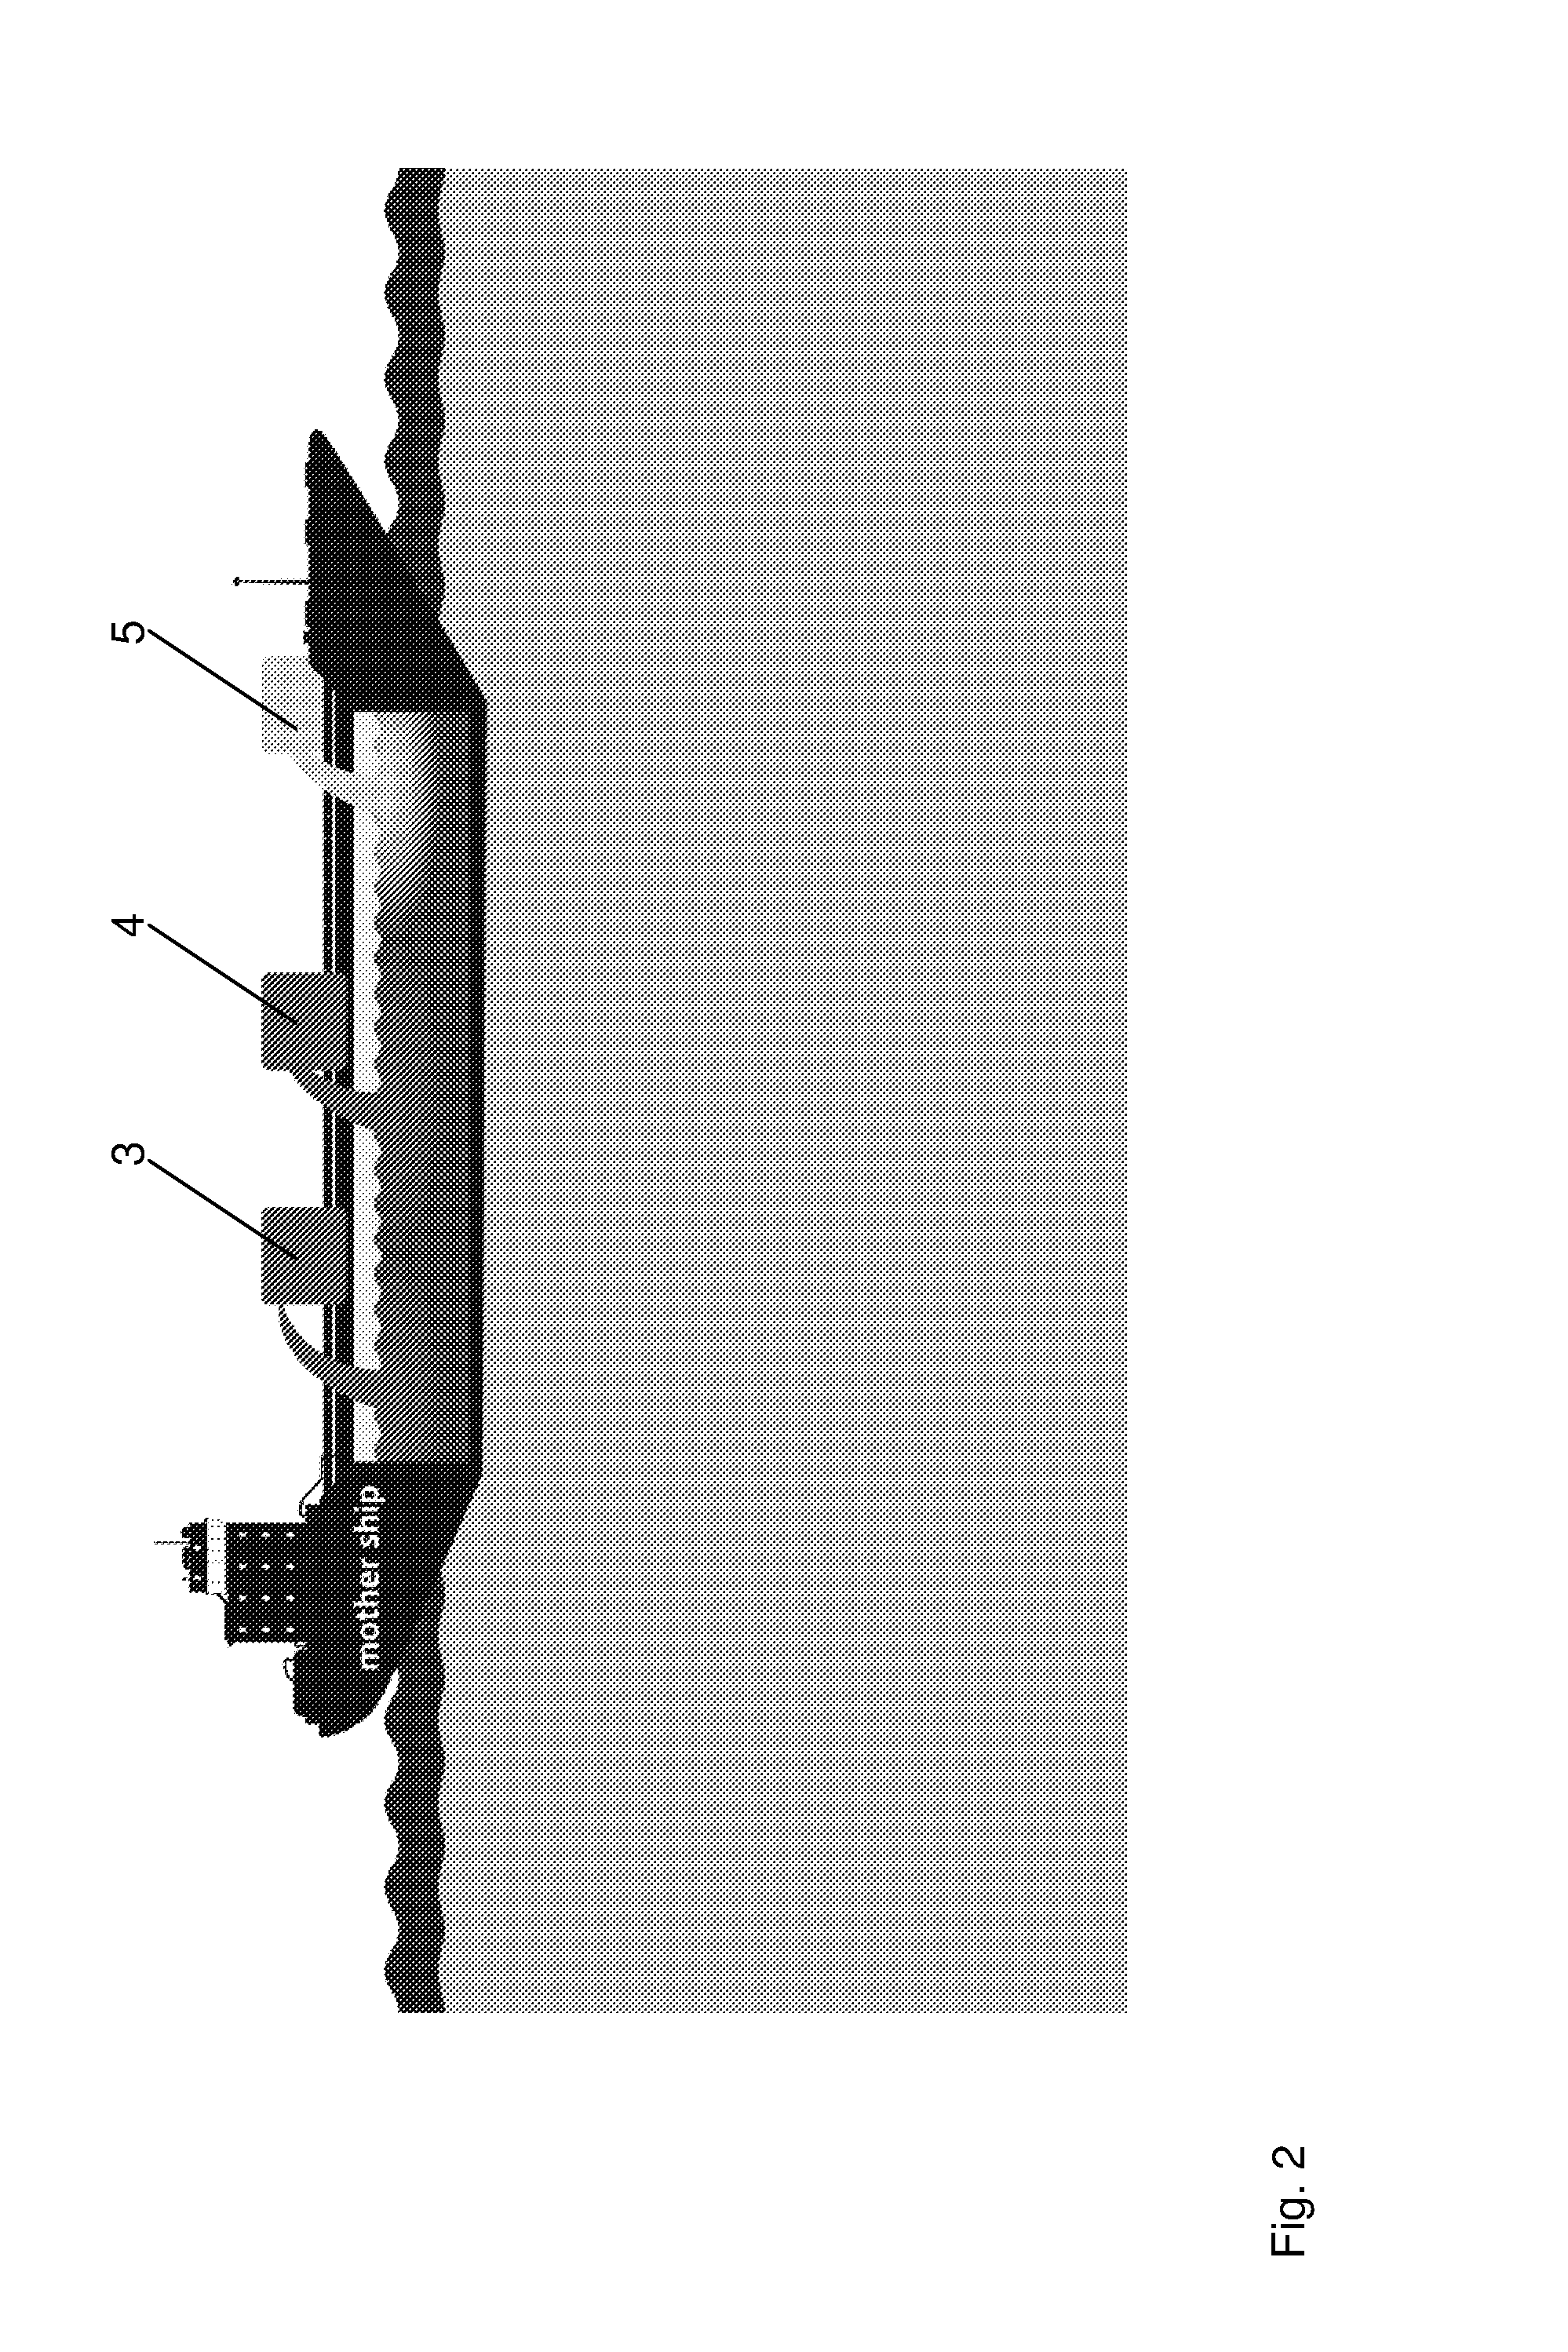 Composition for triggering microbiological processes in water and method of producing the same